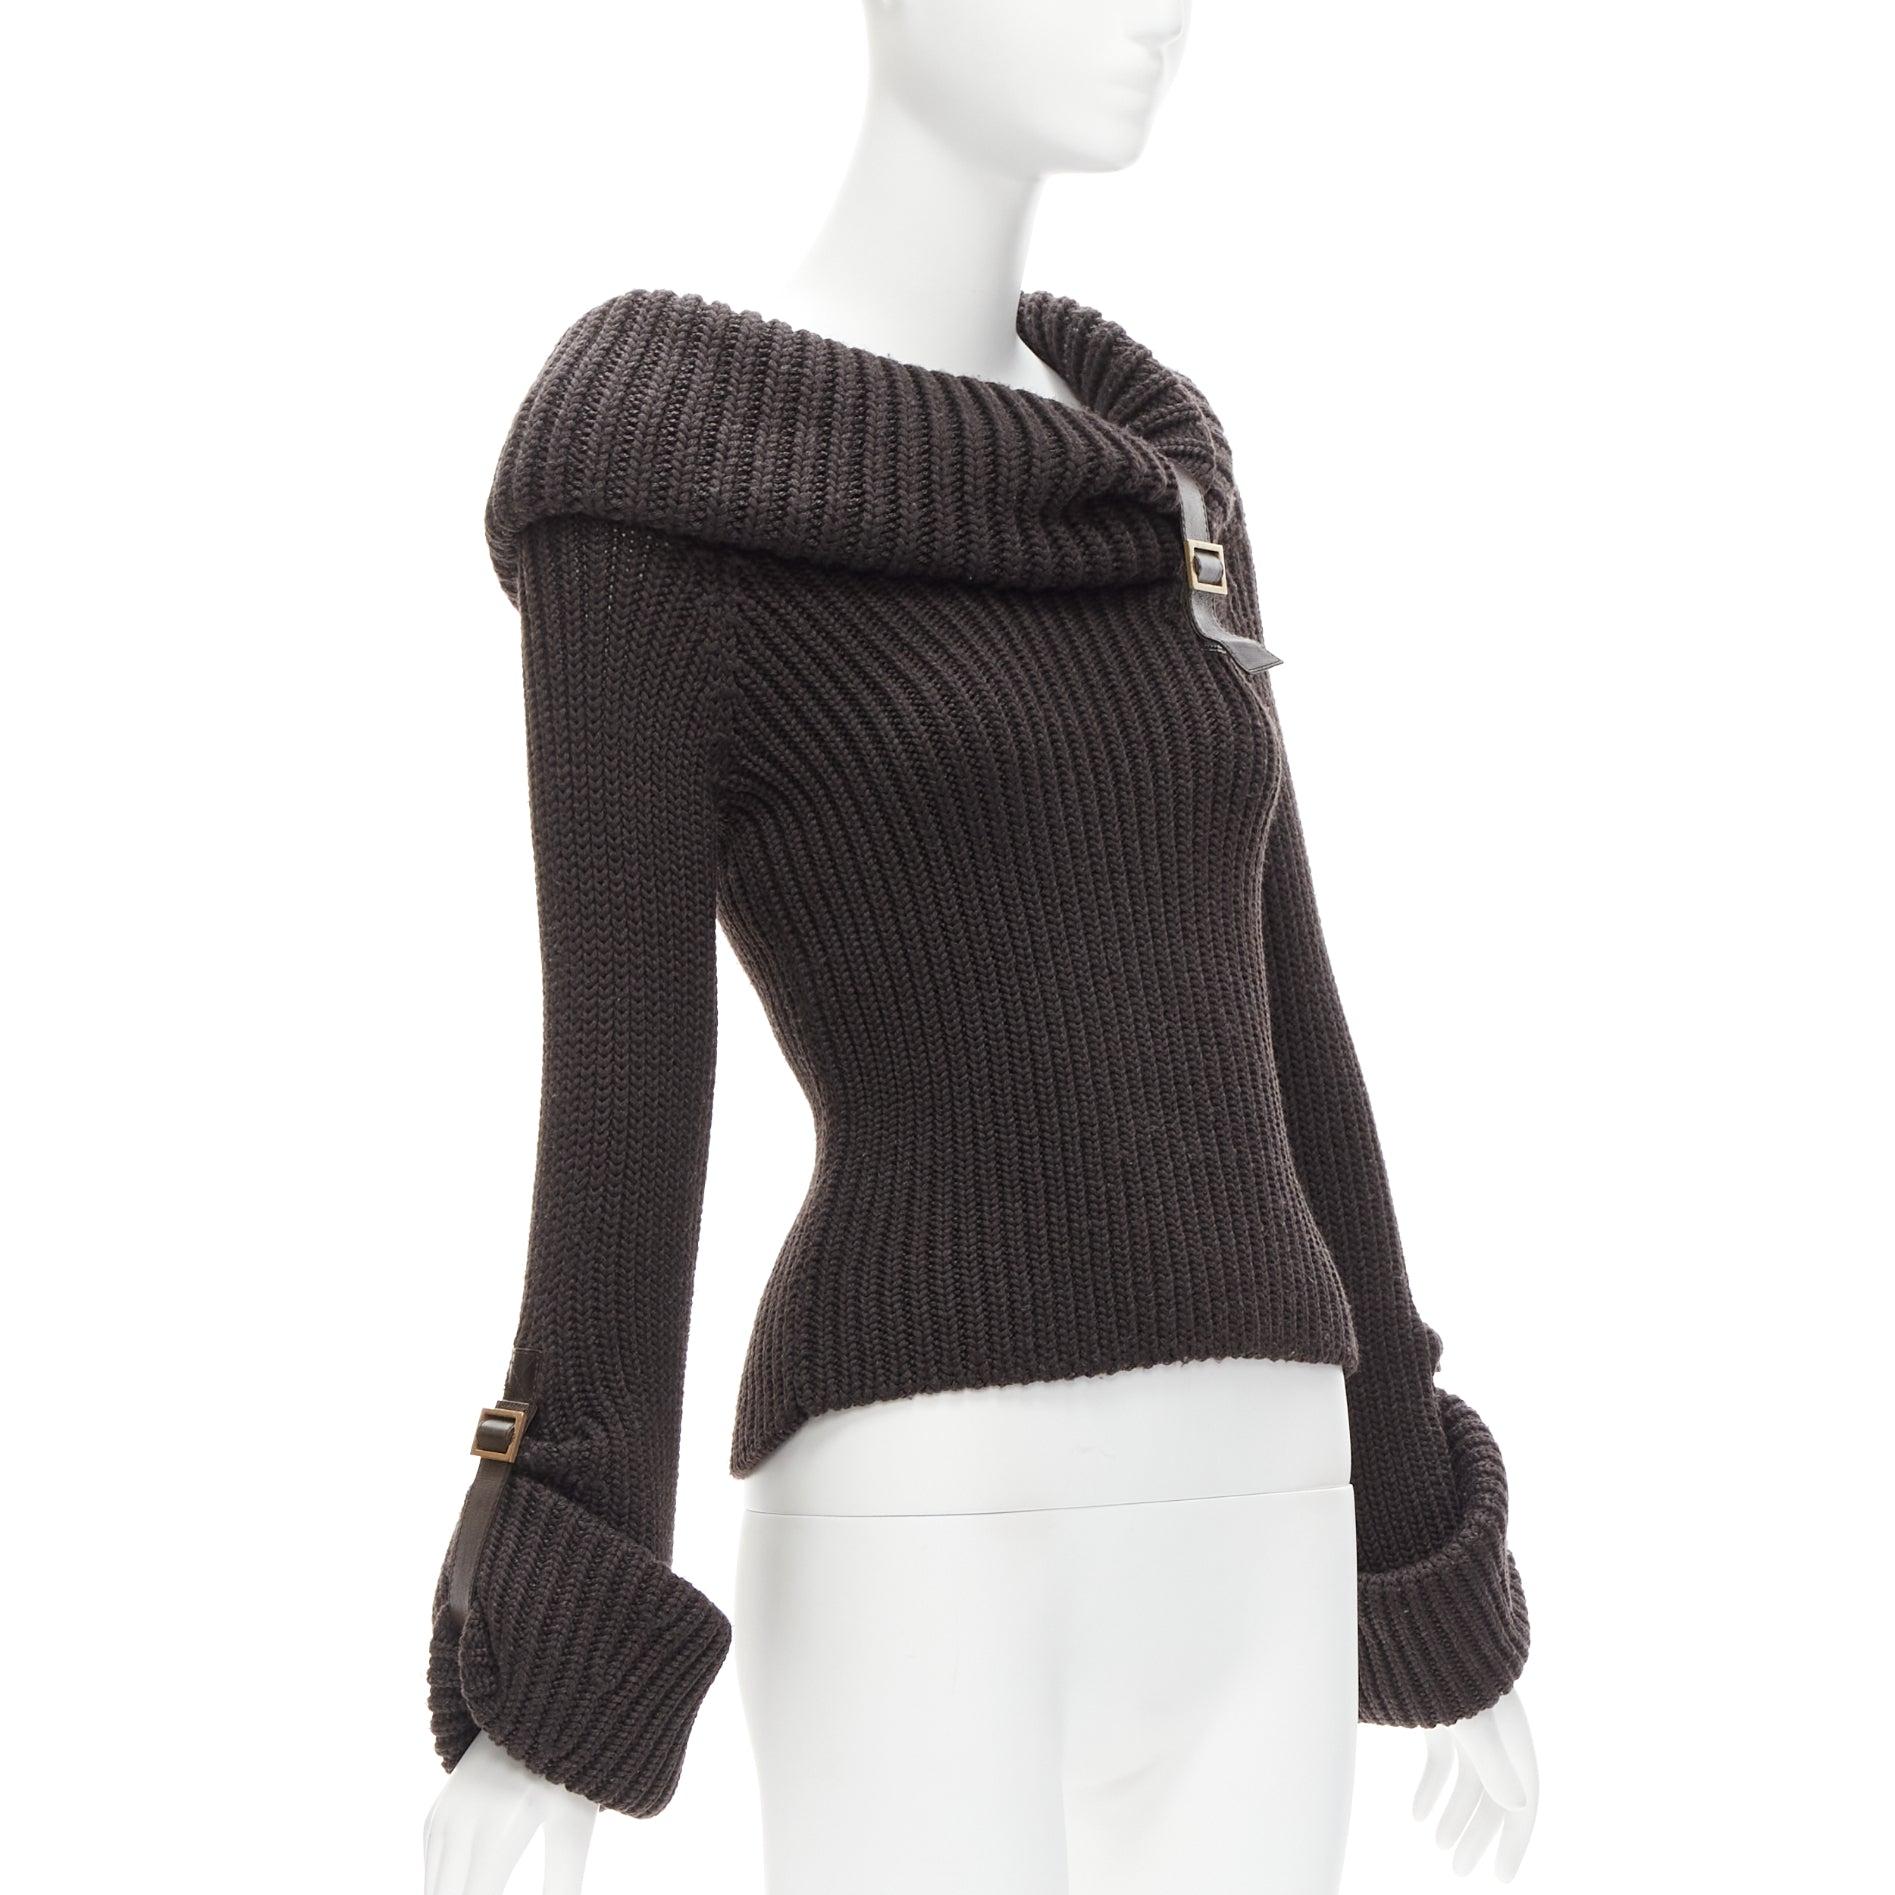 GUCCI grey wool silk cashmere leather buckle knit sweater S
Reference: TGAS/D00911
Brand: Gucci
Material: Virgin Wool, Silk, Cashmere
Color: Grey
Pattern: Solid
Closure: Buckle
Extra Details: Adjustable buckles on leather straps.
Made in: